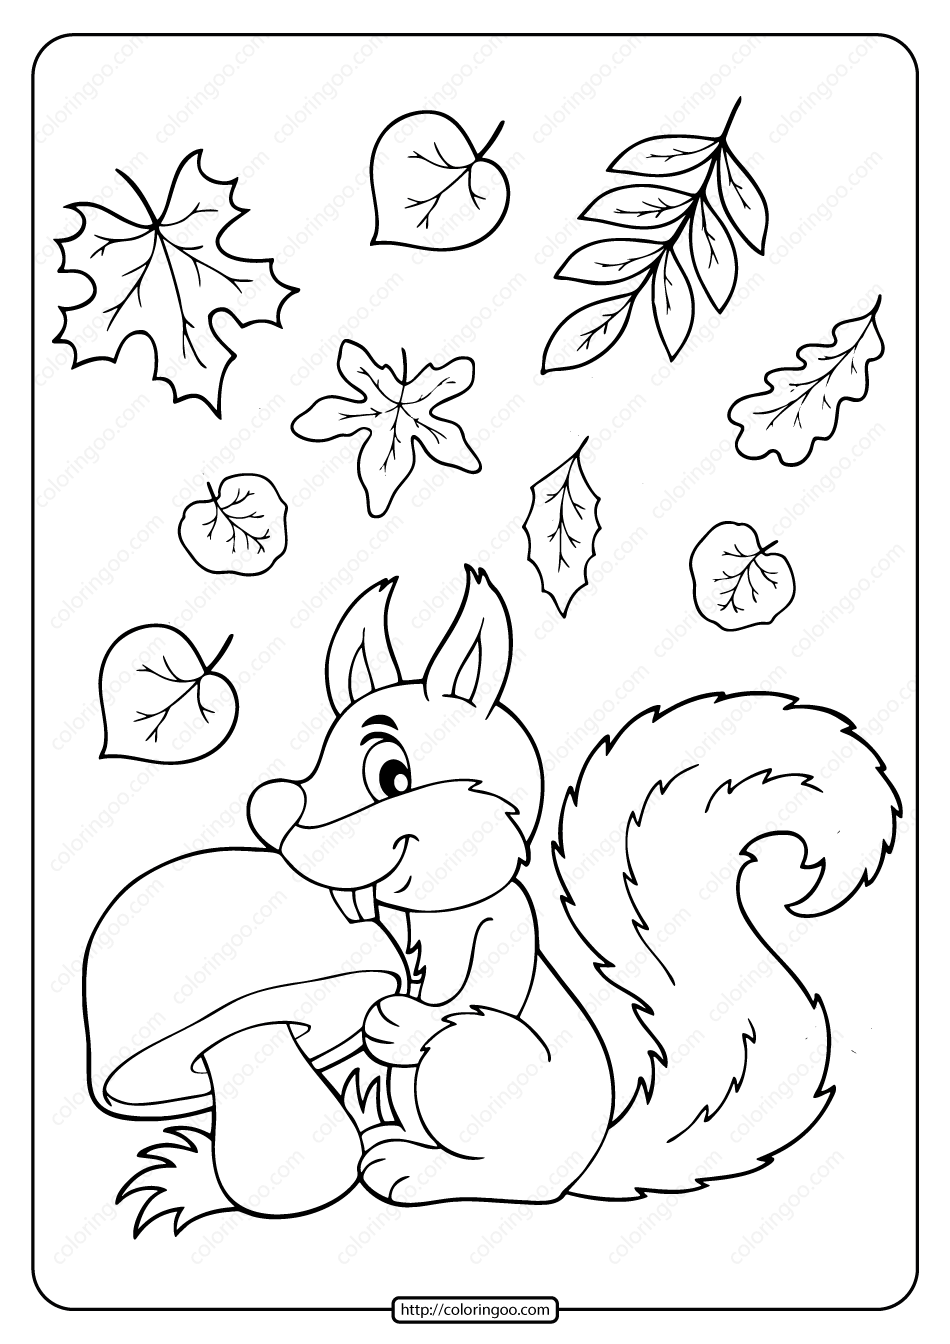 squirrel with mushroom and leaves coloring page